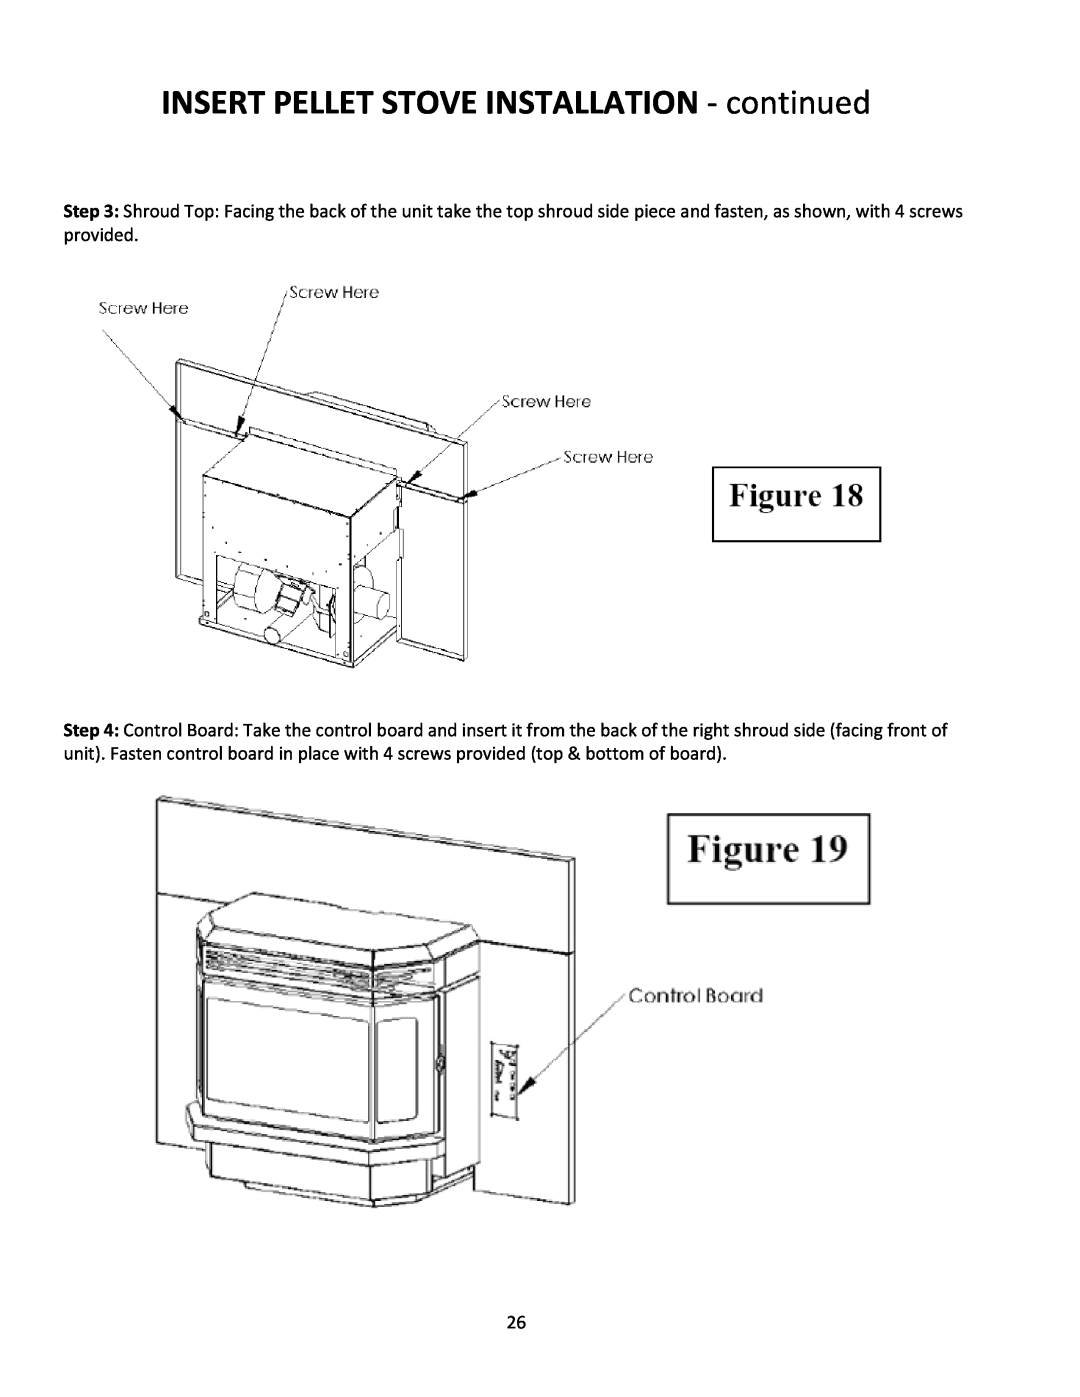 United States Stove 5660(I) manual INSERT PELLET STOVE INSTALLATION ‐ continued 